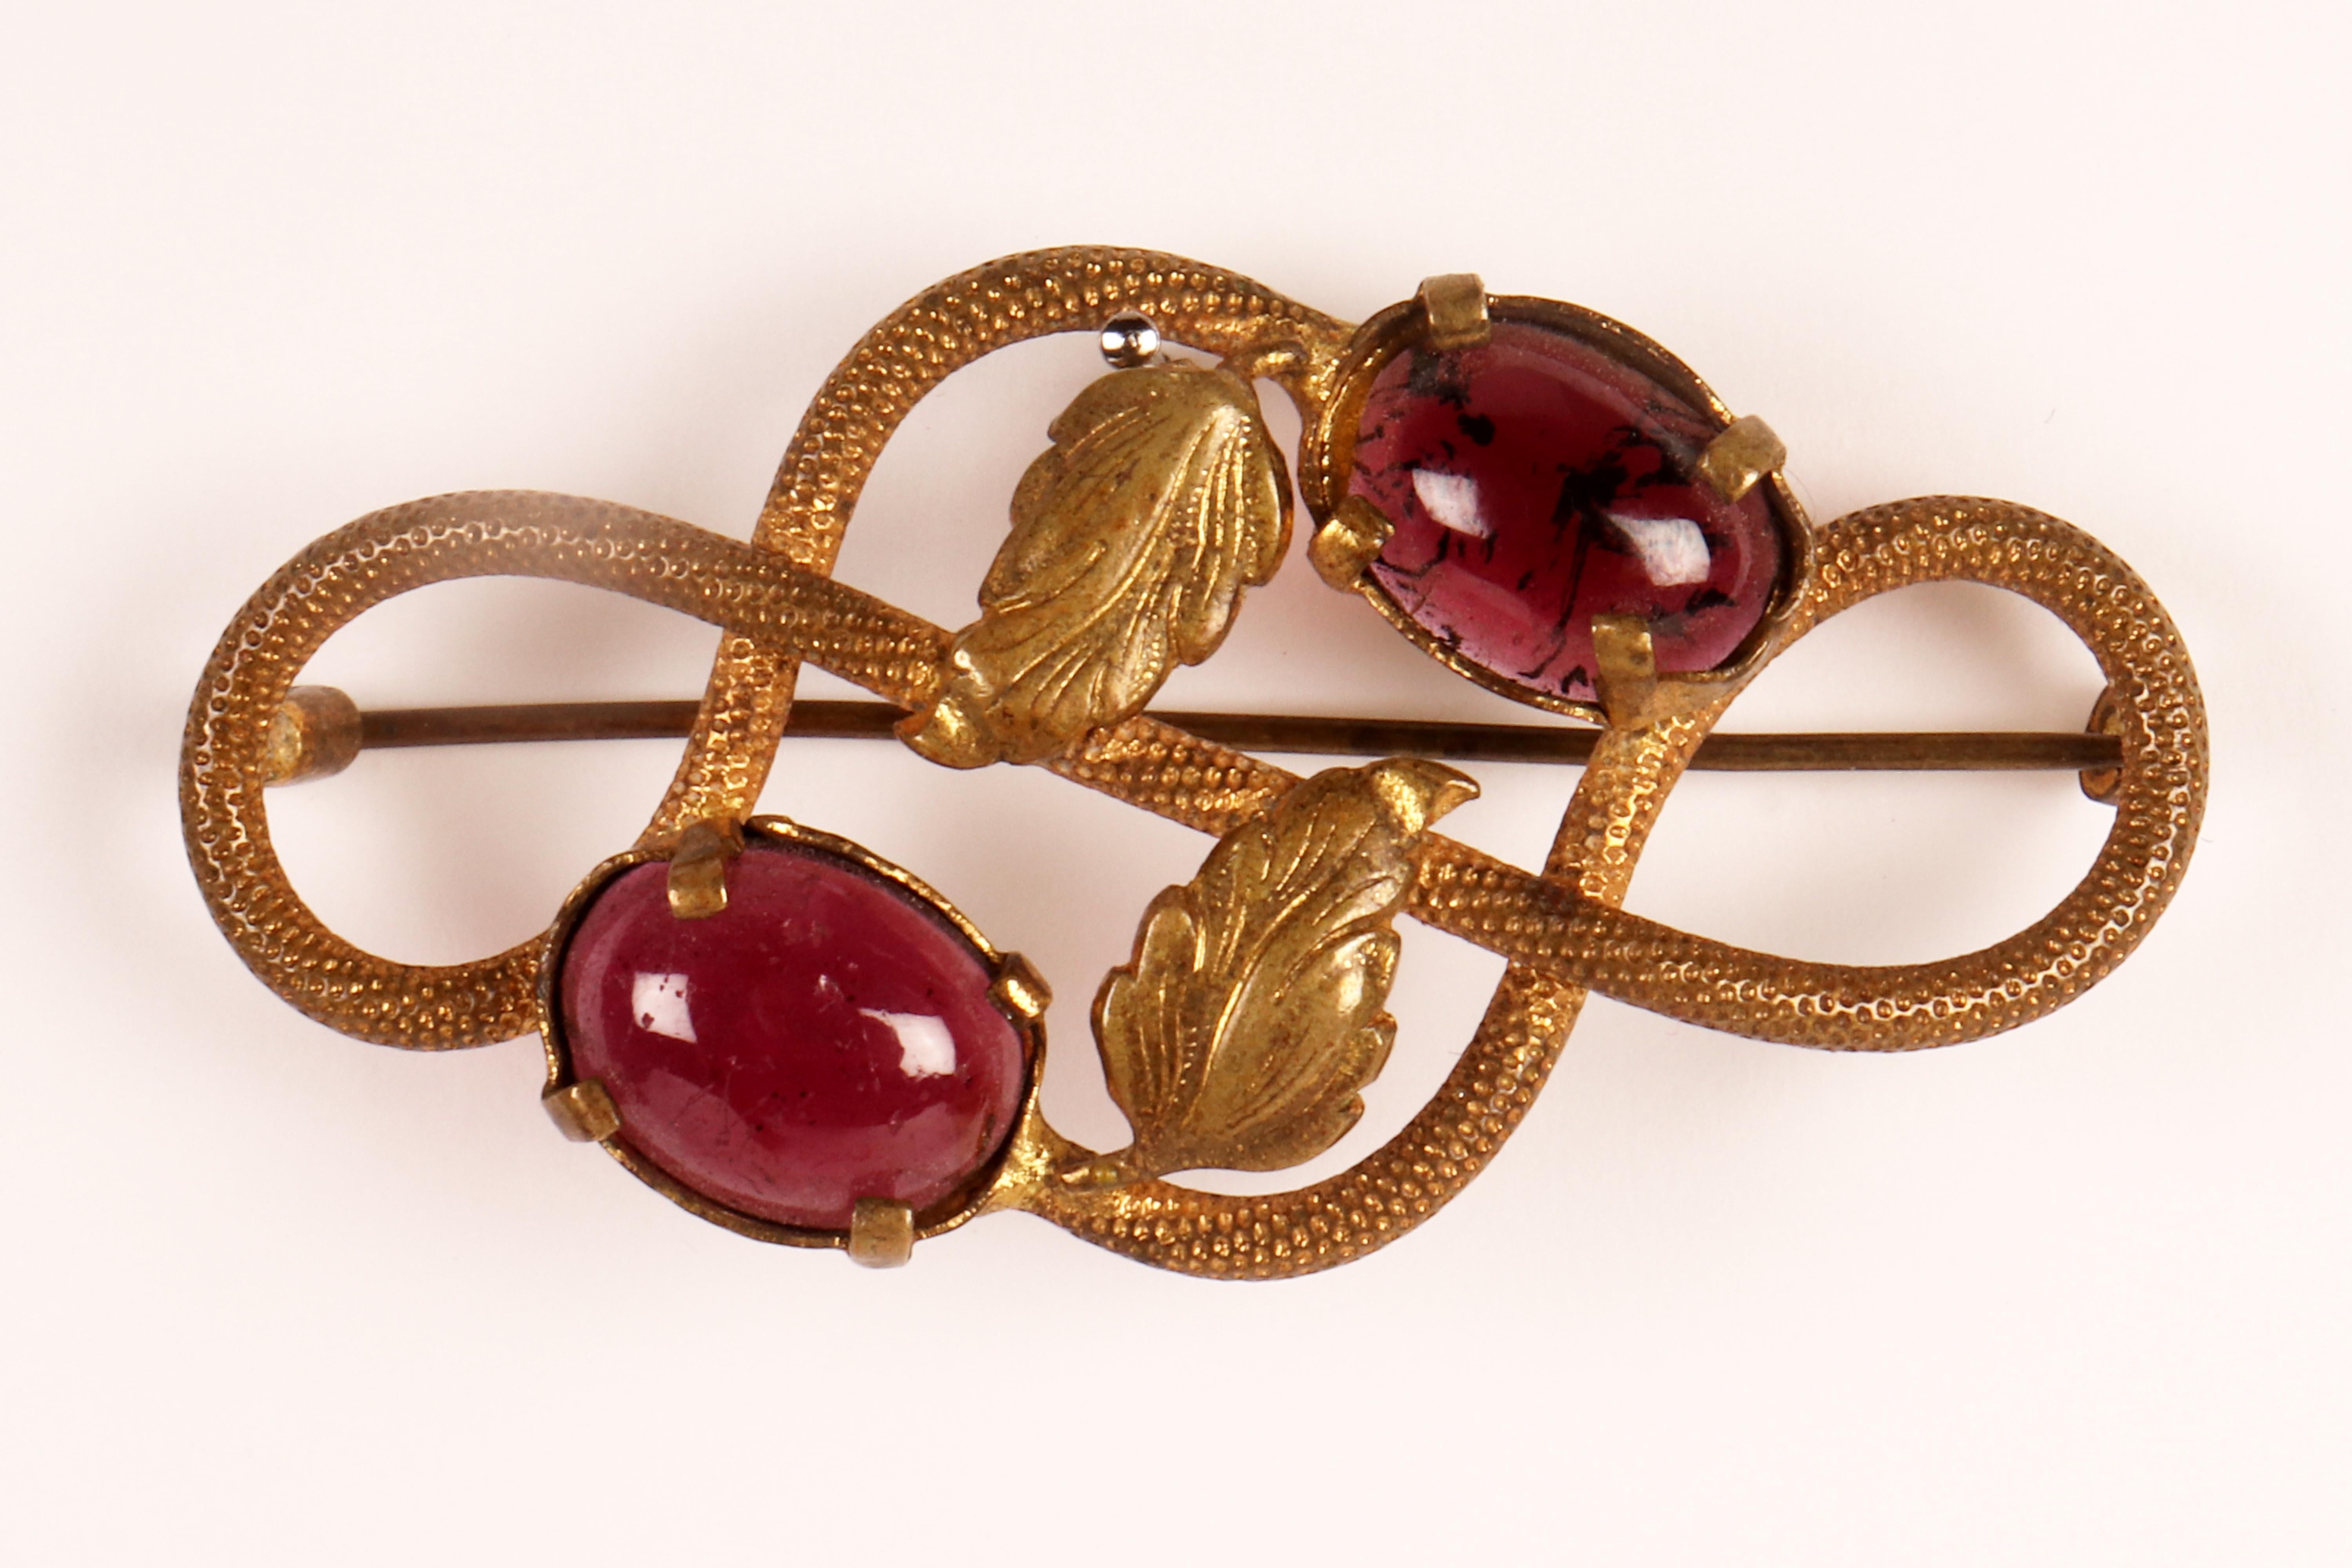 The brooch is made of 14 Kt gold, up of a knot of racemes, two leaves, and two fruits arranged symmetrically in a mirrored knot. The body of the raceme is entirely chiseled with spiral decoration, the leaves finished as a burin. The two oval garnets